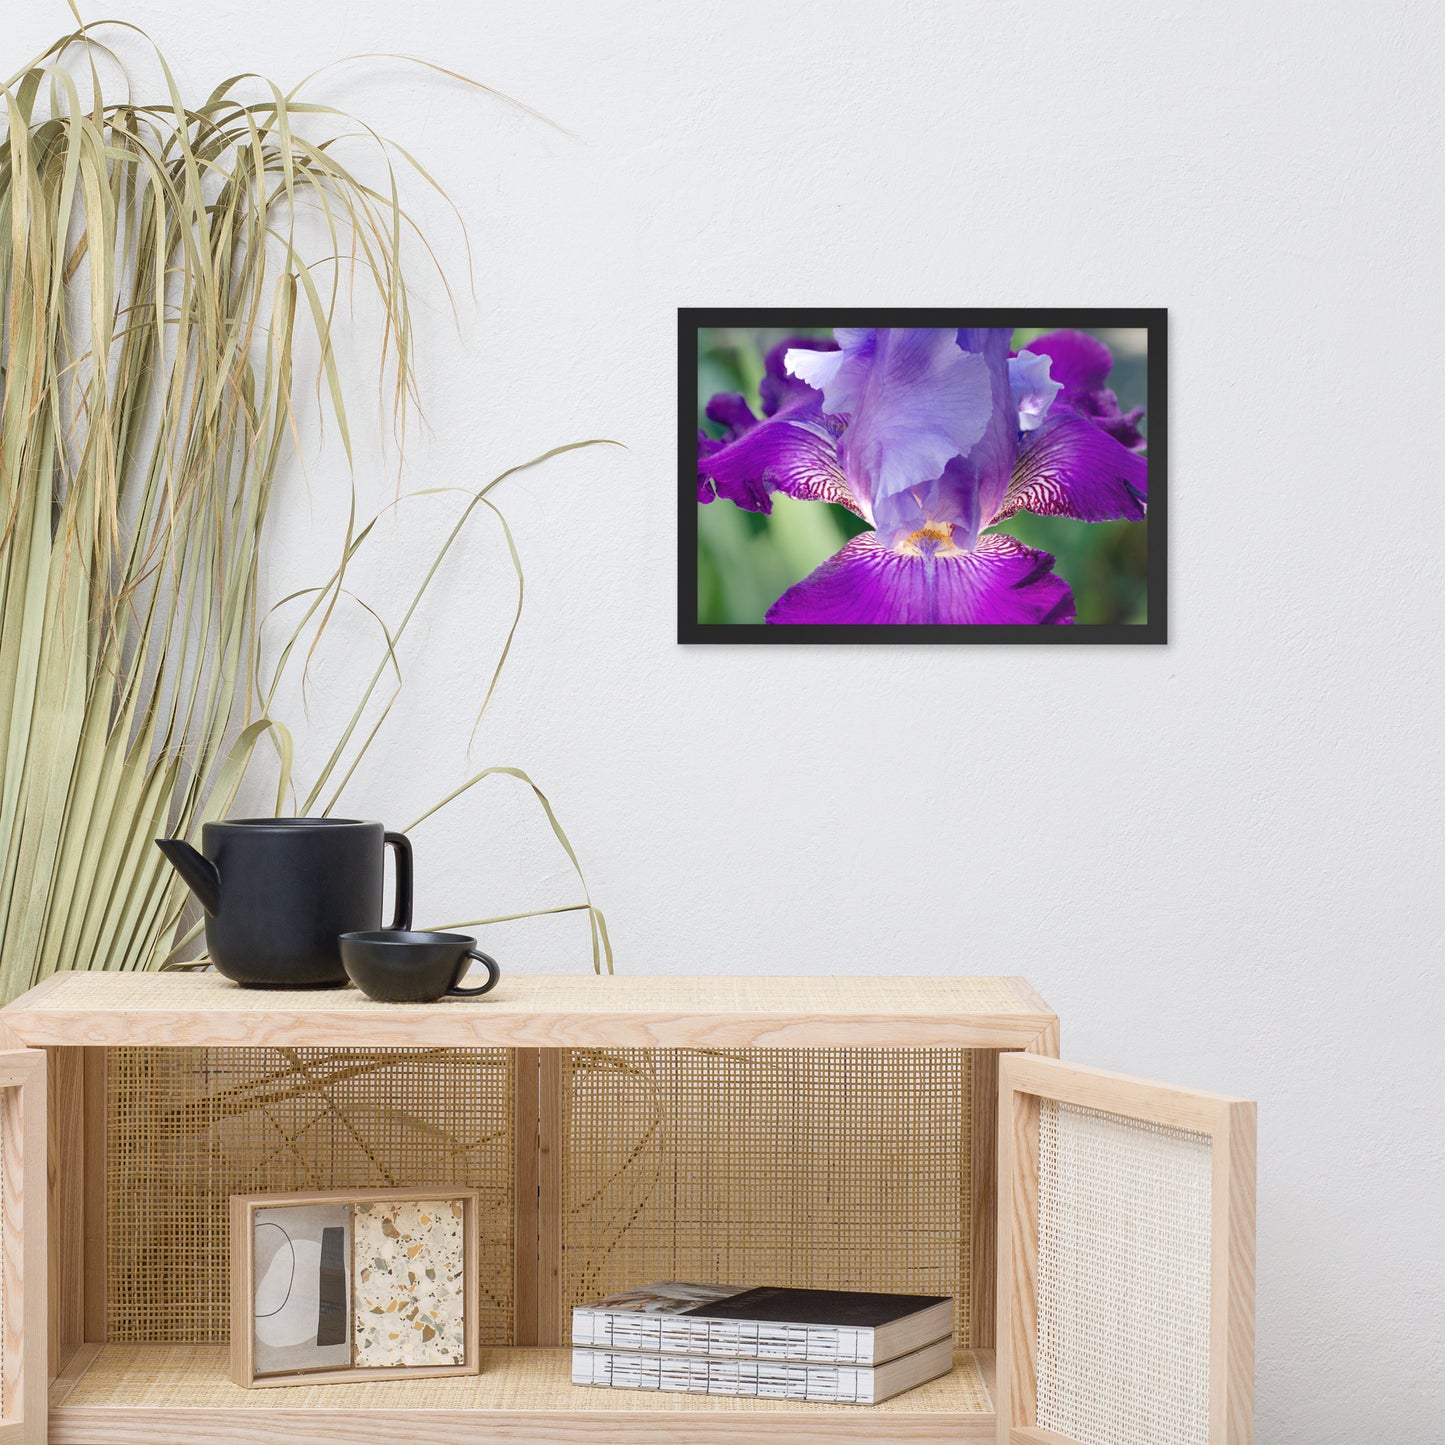 Small Pictures For Bedroom Wall: Glowing Iris - Floral / Botanical / Nature Photo Framed Wall Art Print - Artwork - Wall Decor - Modern Home Decor